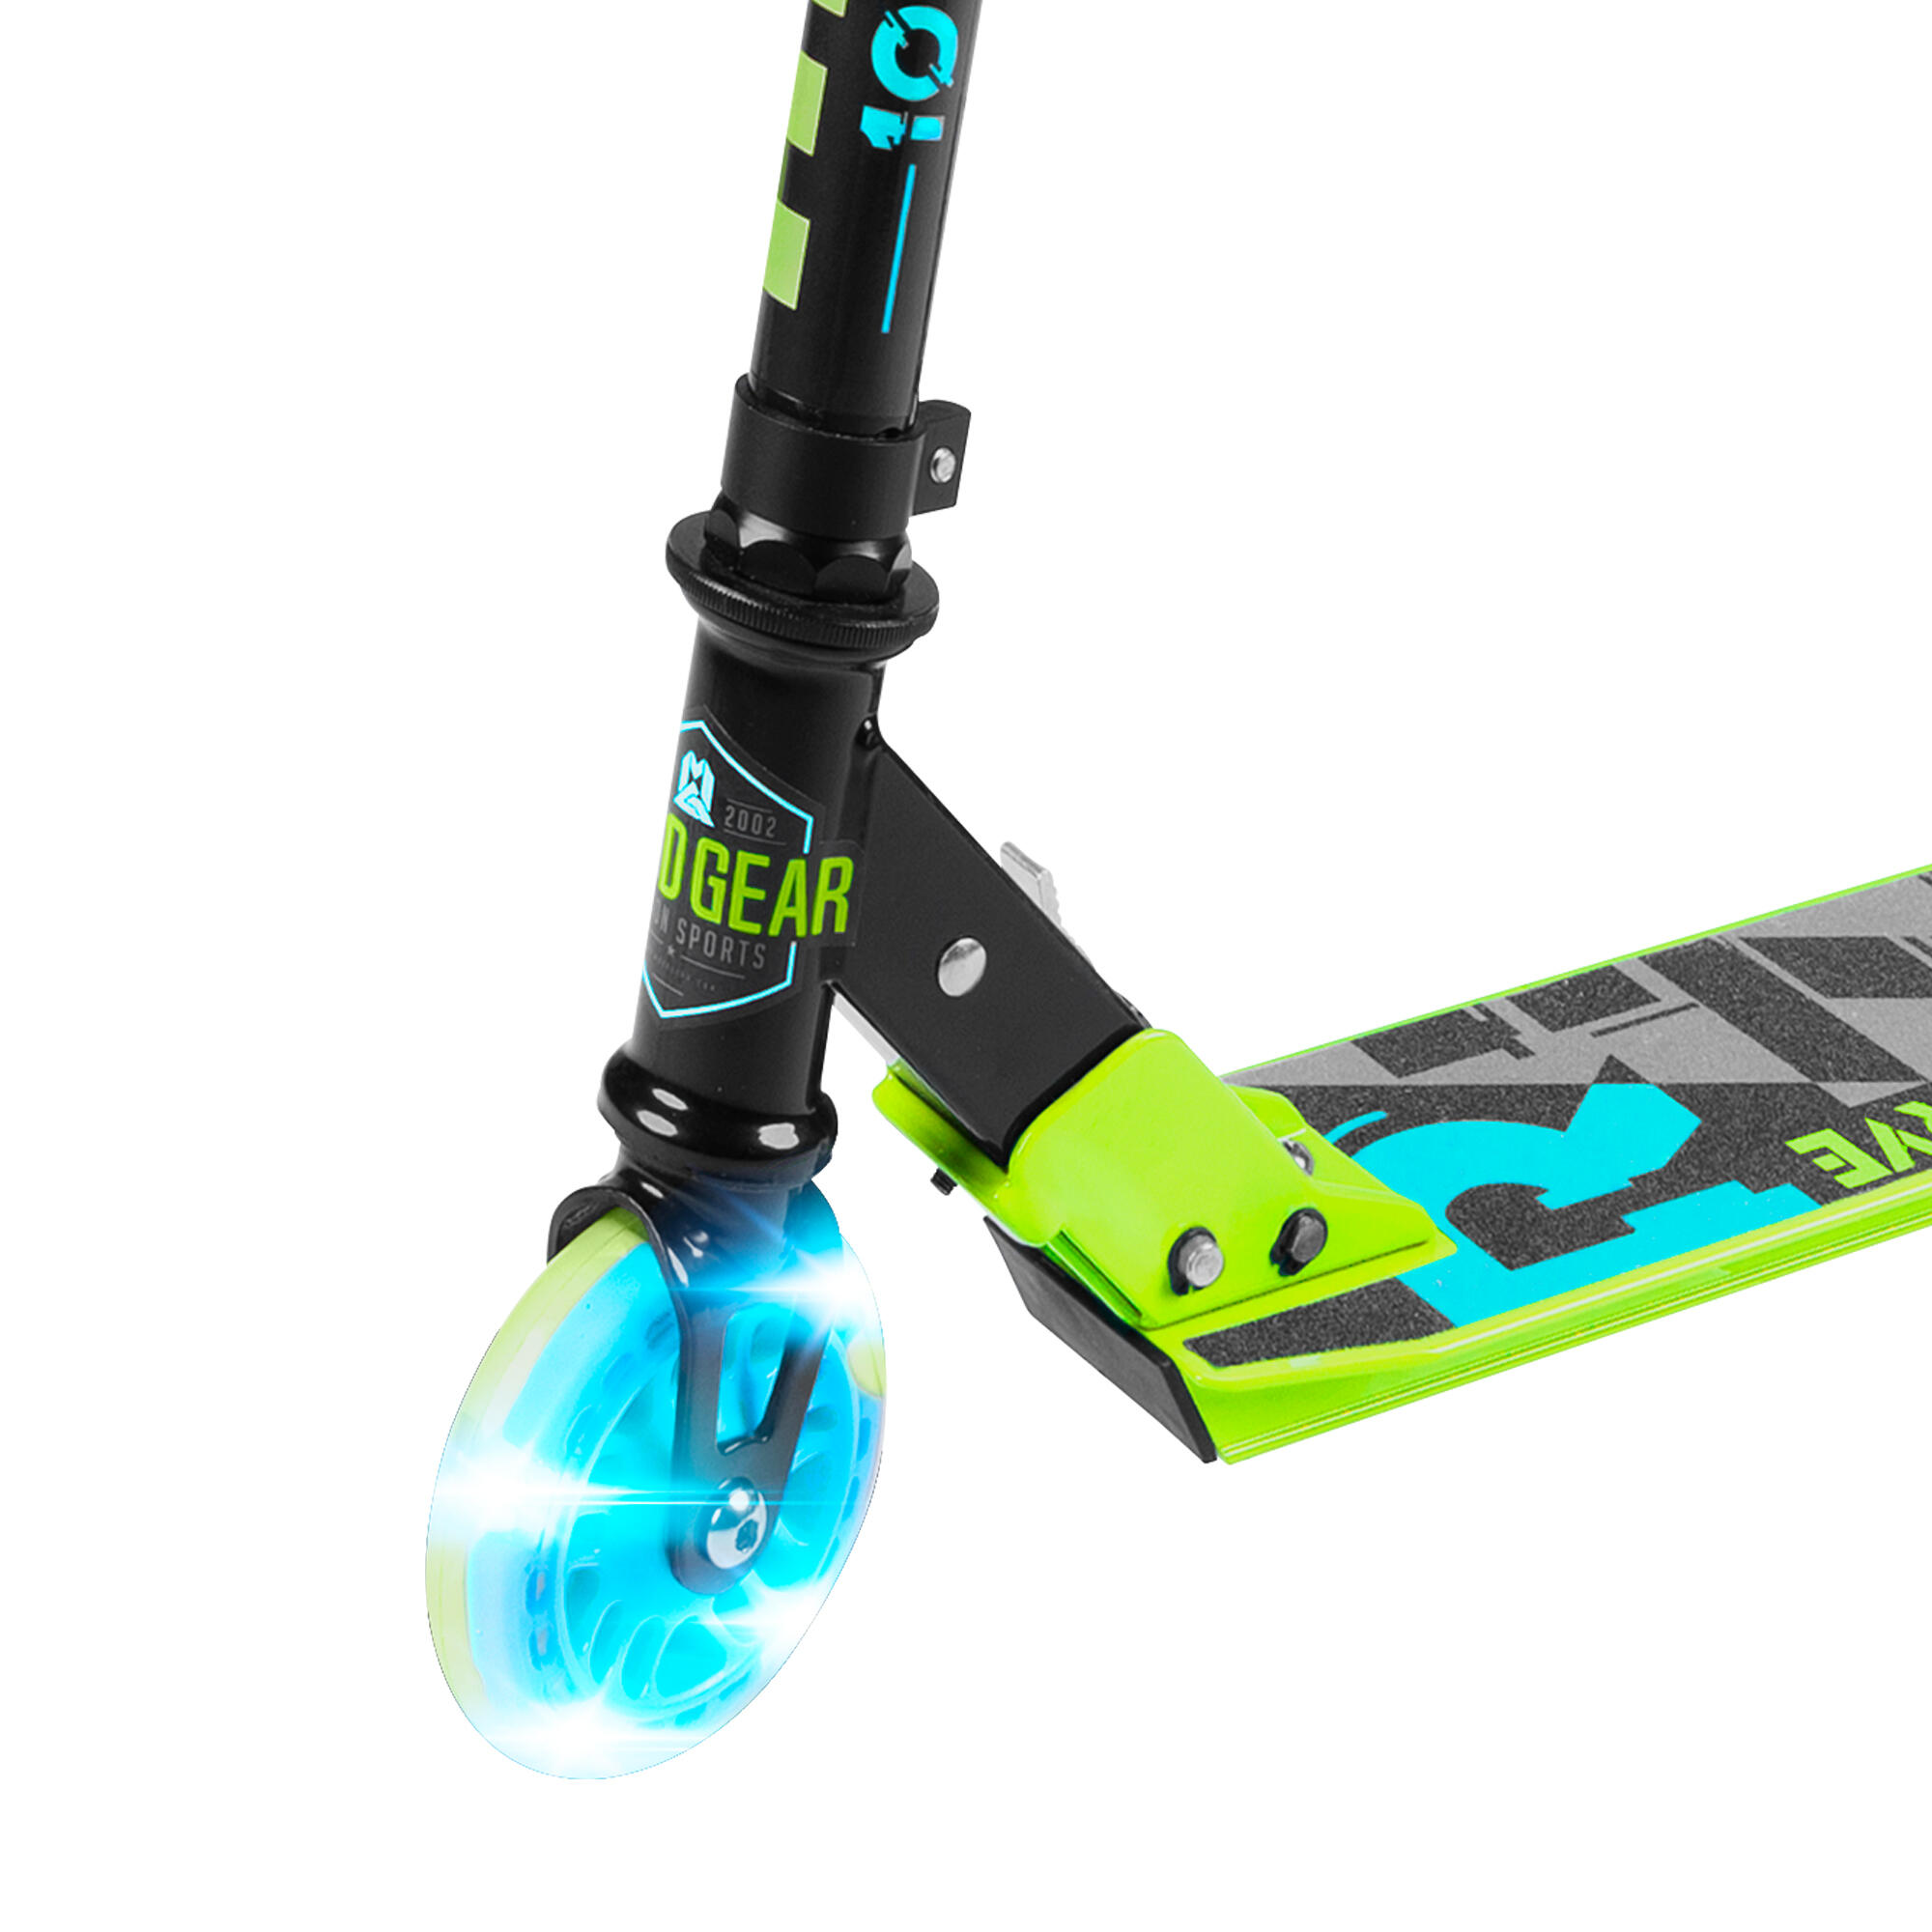 MADD GEAR CARVE RIZE LIGHT UP WHEEL SCOOTER – AGES 3 YEARS+ - WAVES 2/8